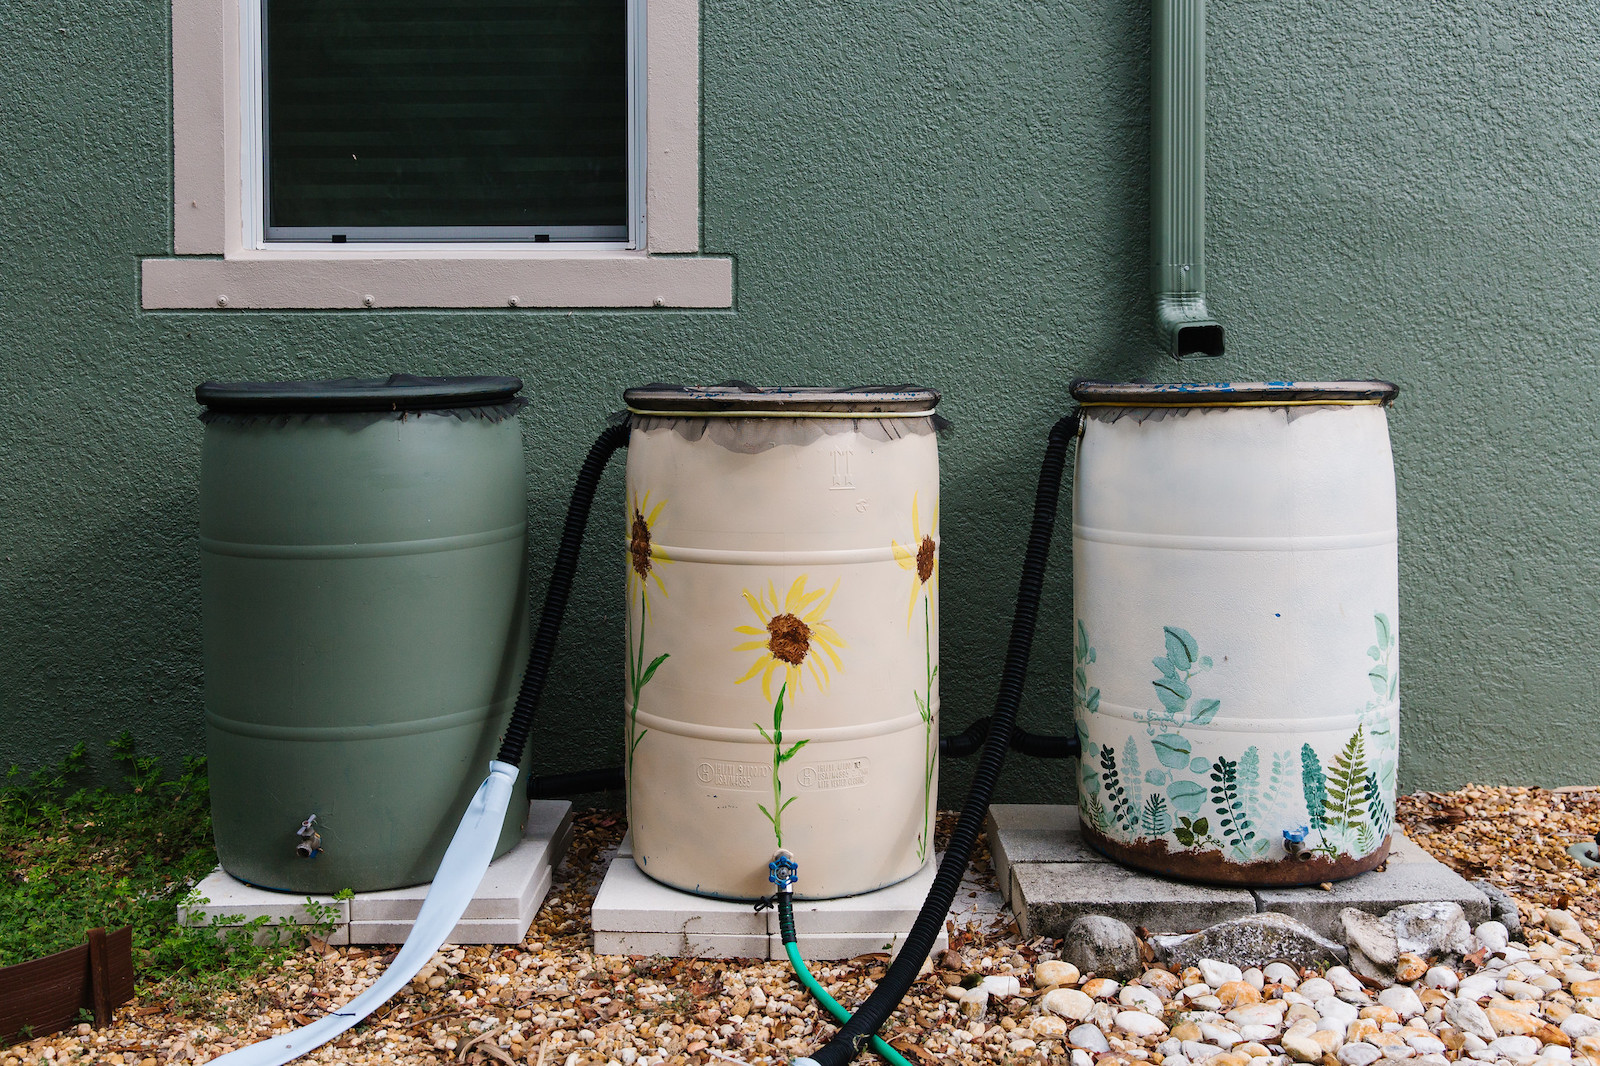 Make Your Garden More Resilient with a Rain Barrel